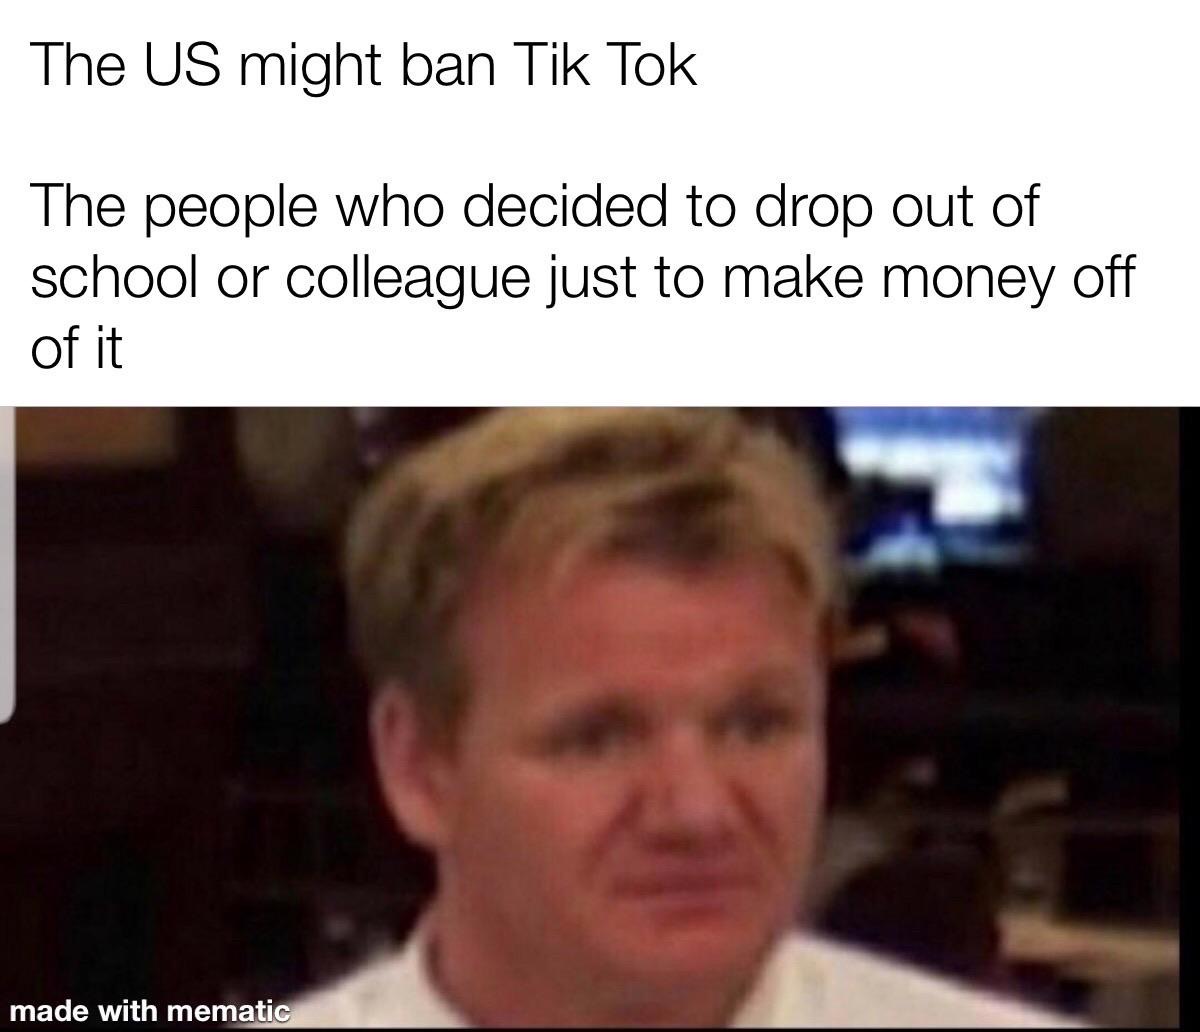 corn dog gordon ramsay - The Us might ban Tik Tok The people who decided to drop out of school or colleague just to make money off of it made with mematic